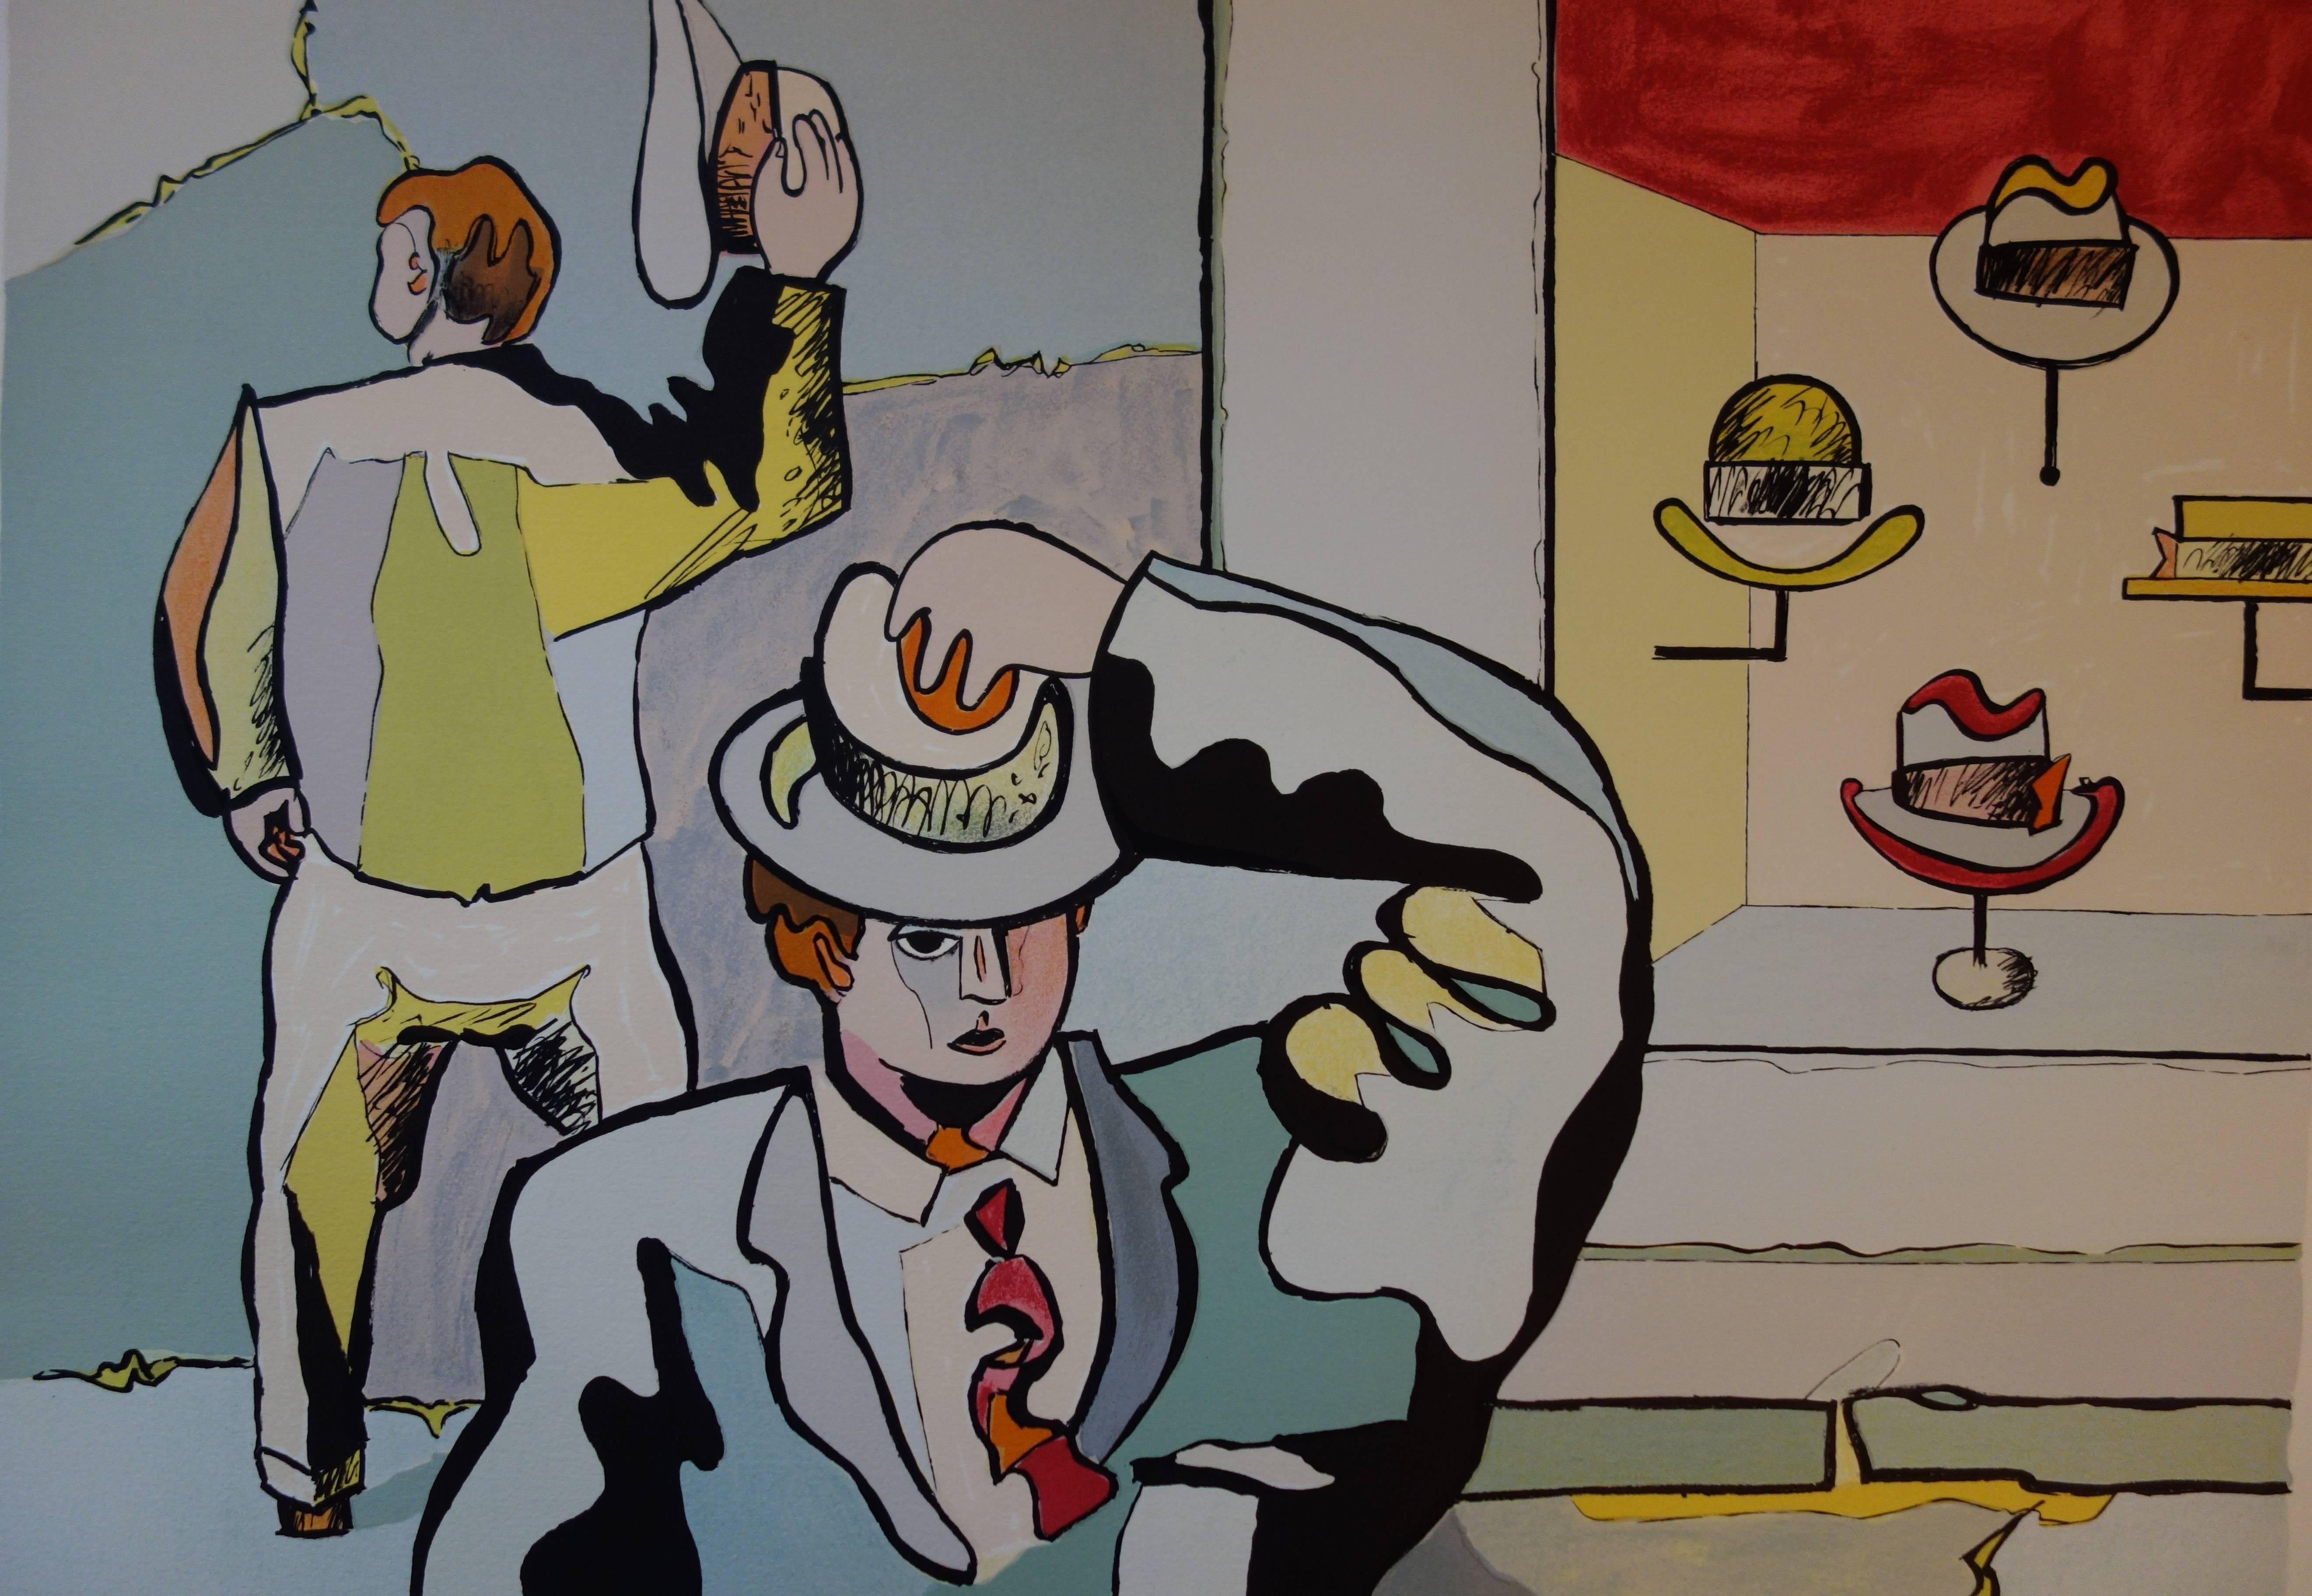 In the Hats Shop - Original handsigned lithograph - 100 copies - Gray Figurative Print by Jean Helion